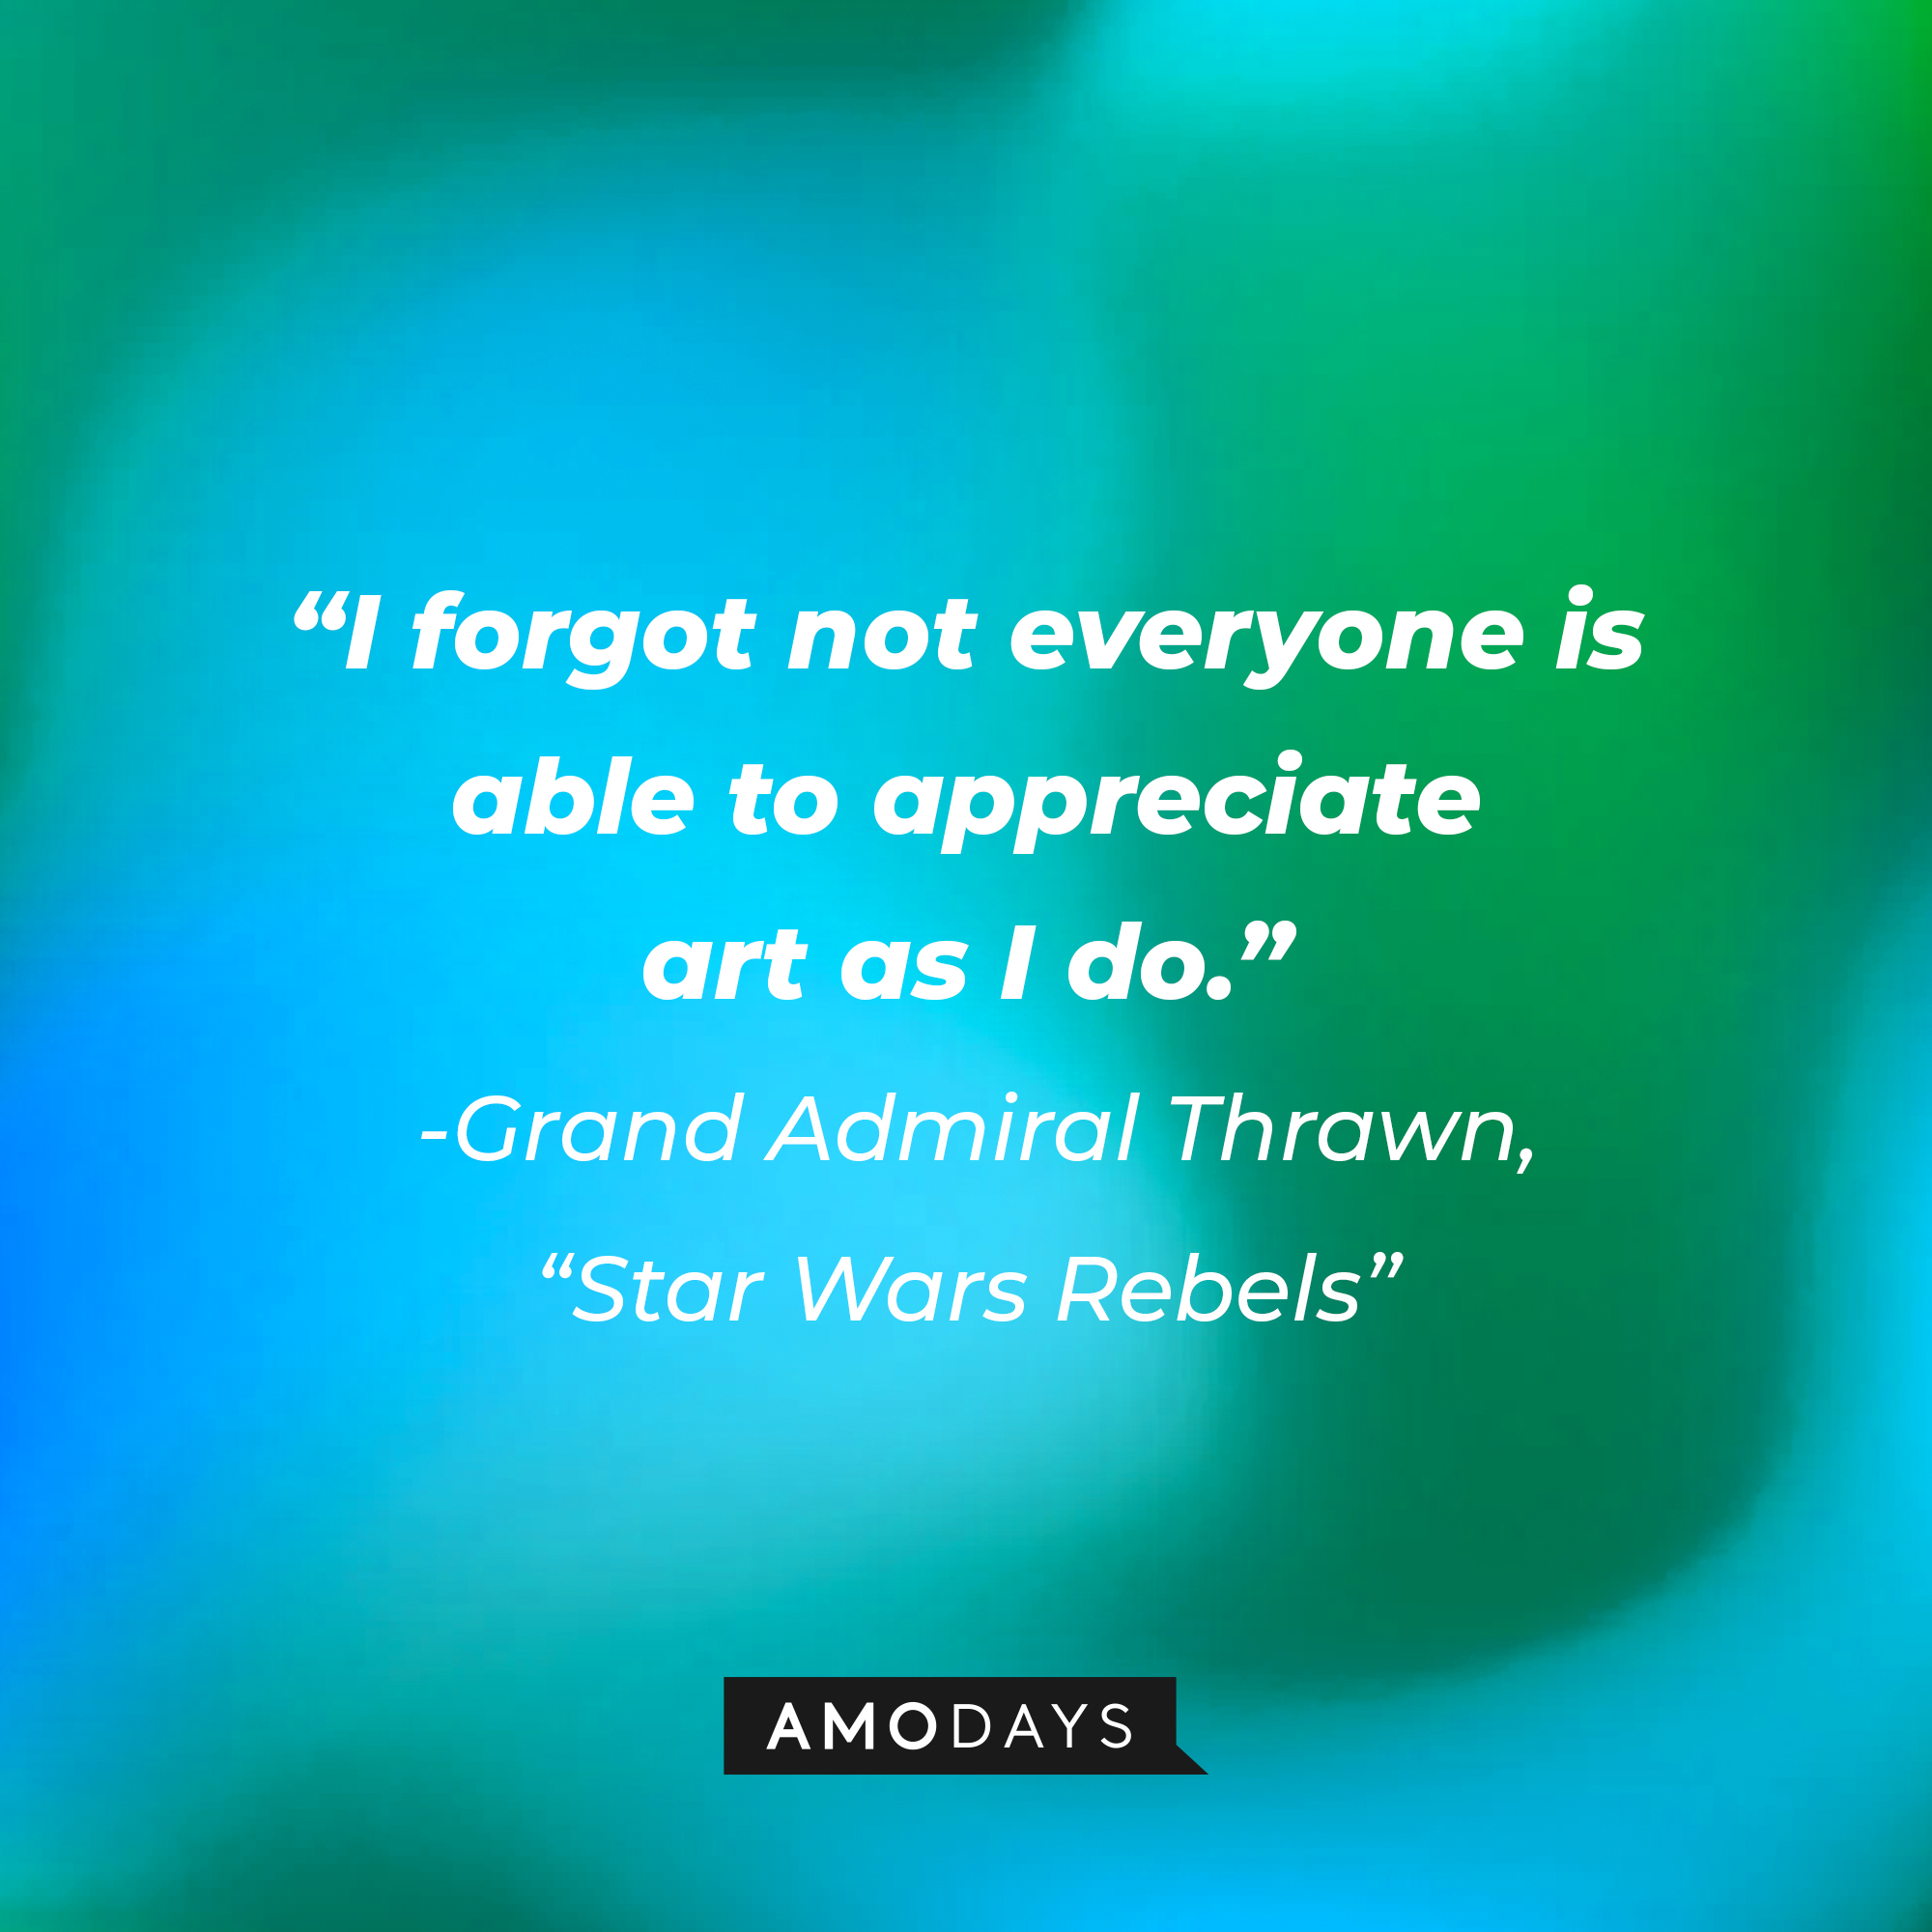 Grand Admiral Thrawn's quote: "I forgot not everyone is able to appreciate art as I do." | Source: AmoDays